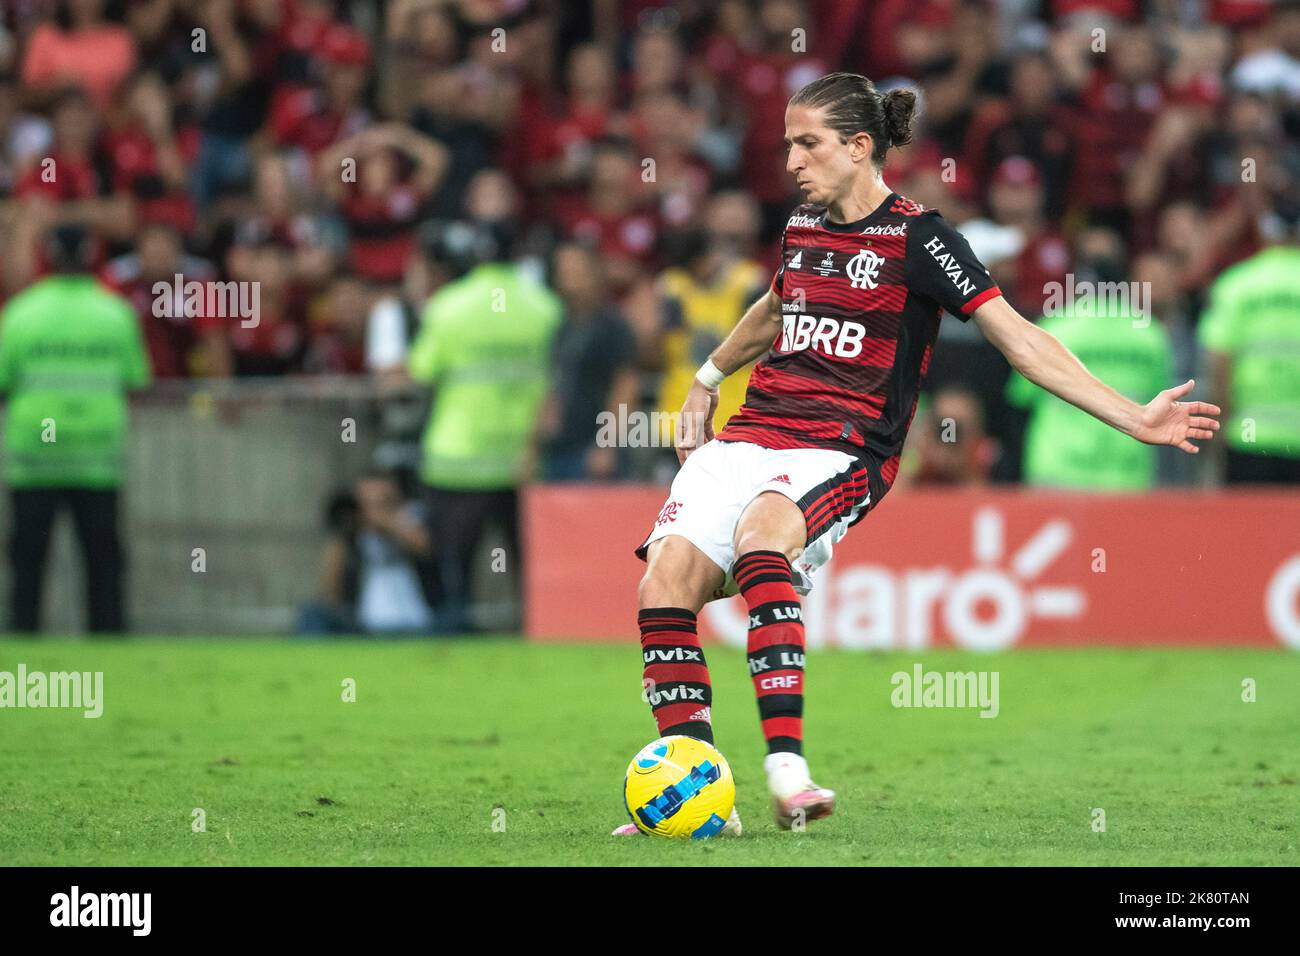 Rio, Brazil - October 19, 2022: Filipe Luís player in match between Flamengo vs Corinthians by second match of final round of Brazilian Cup in Maracan Stock Photo